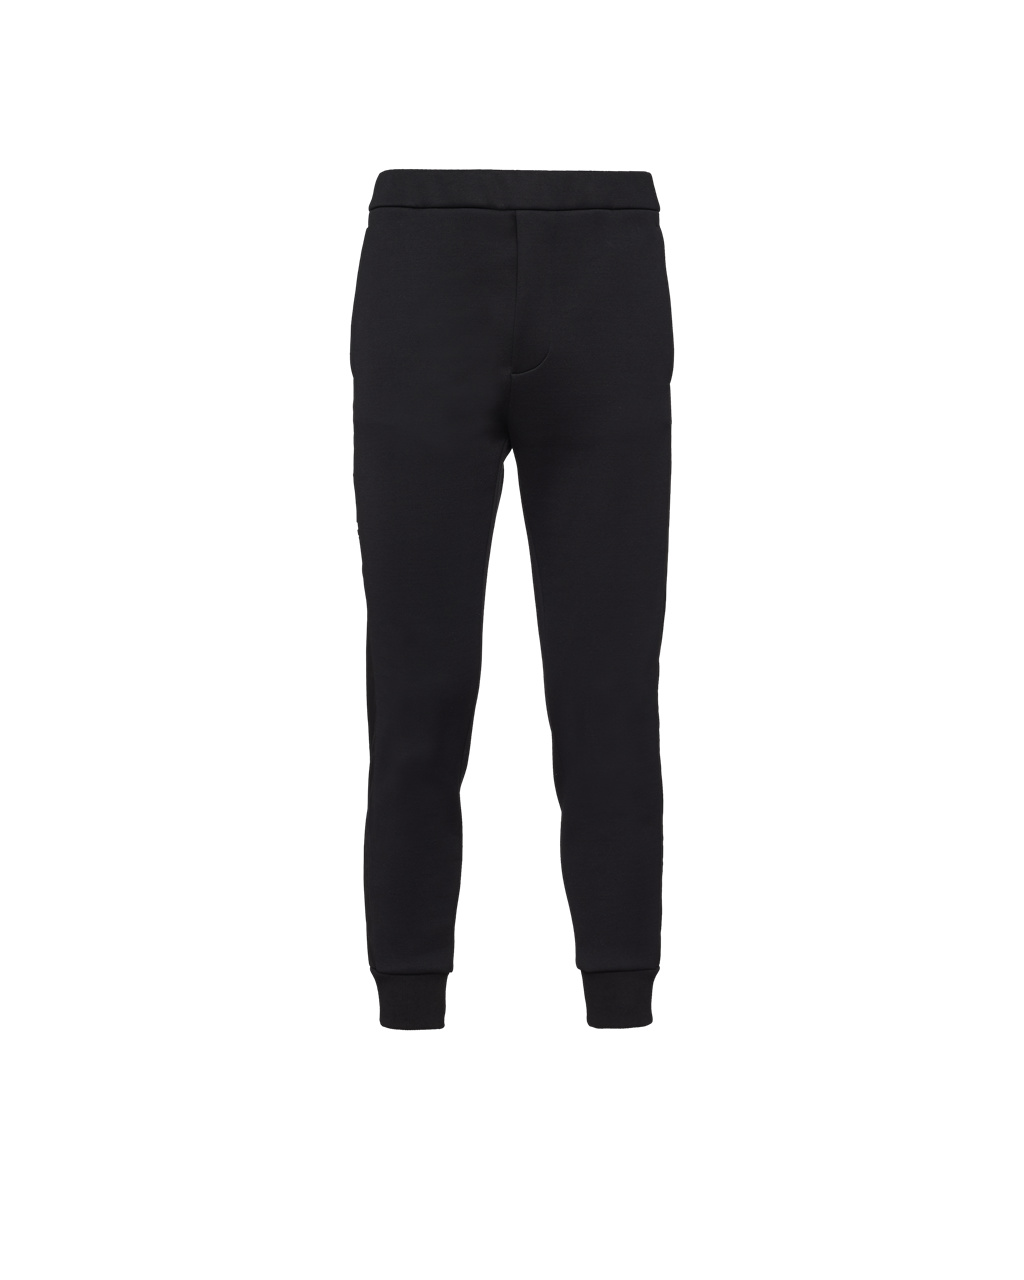 Prada Sweatpants Outlet South Africa Online - Sweatpants With Nylon ...